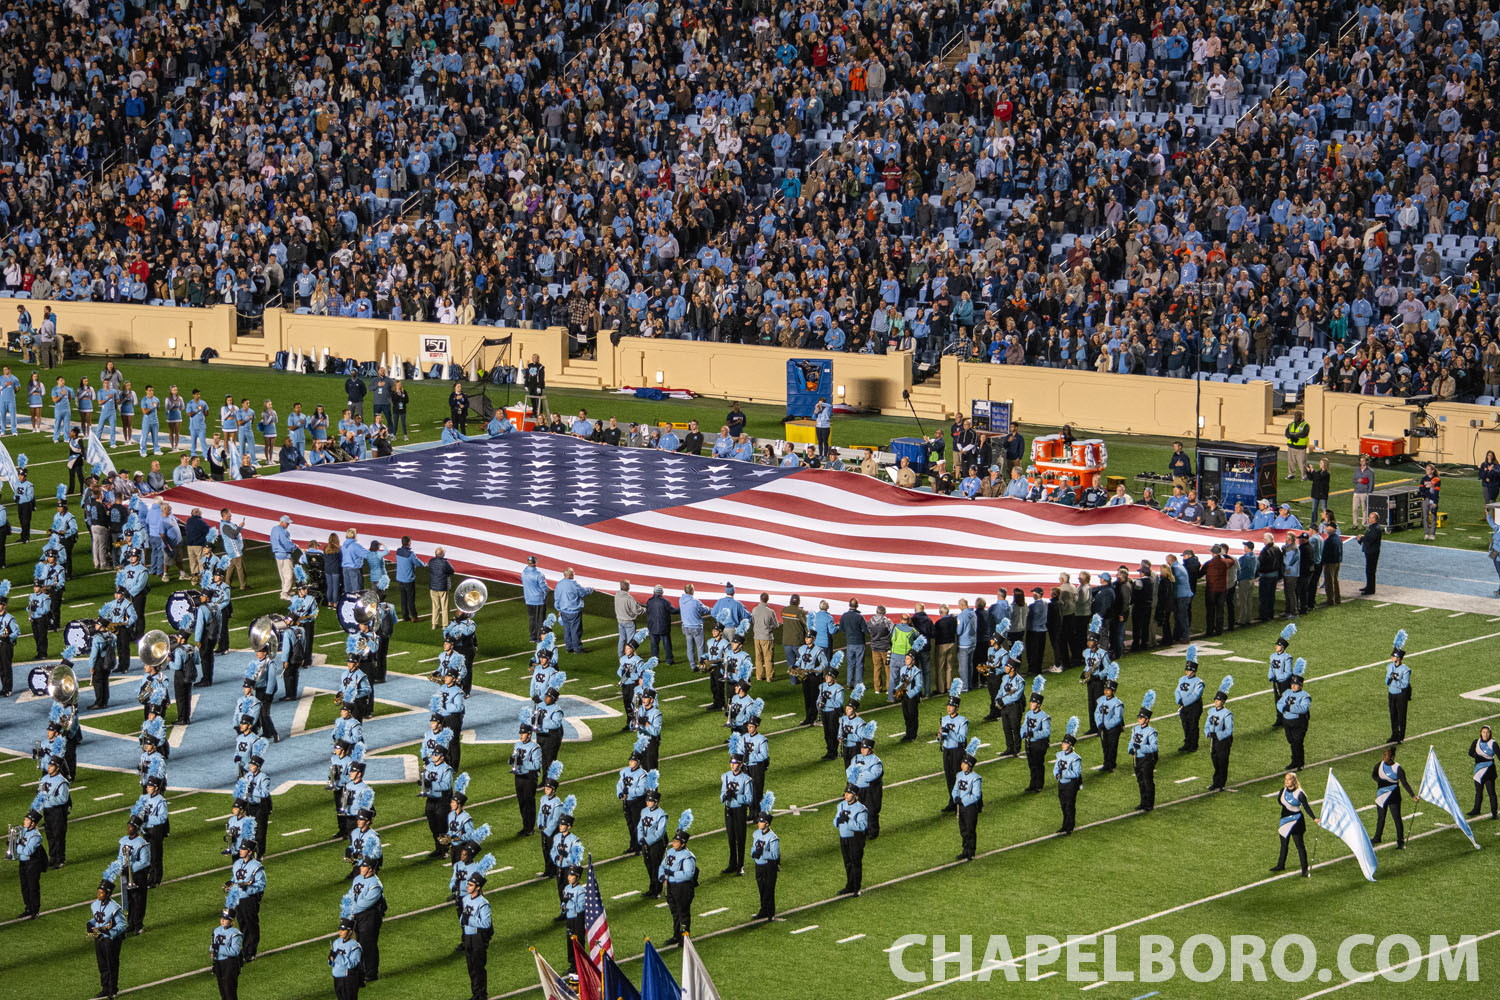 UNC Football Offering First Responders Free Tickets to Home Opener